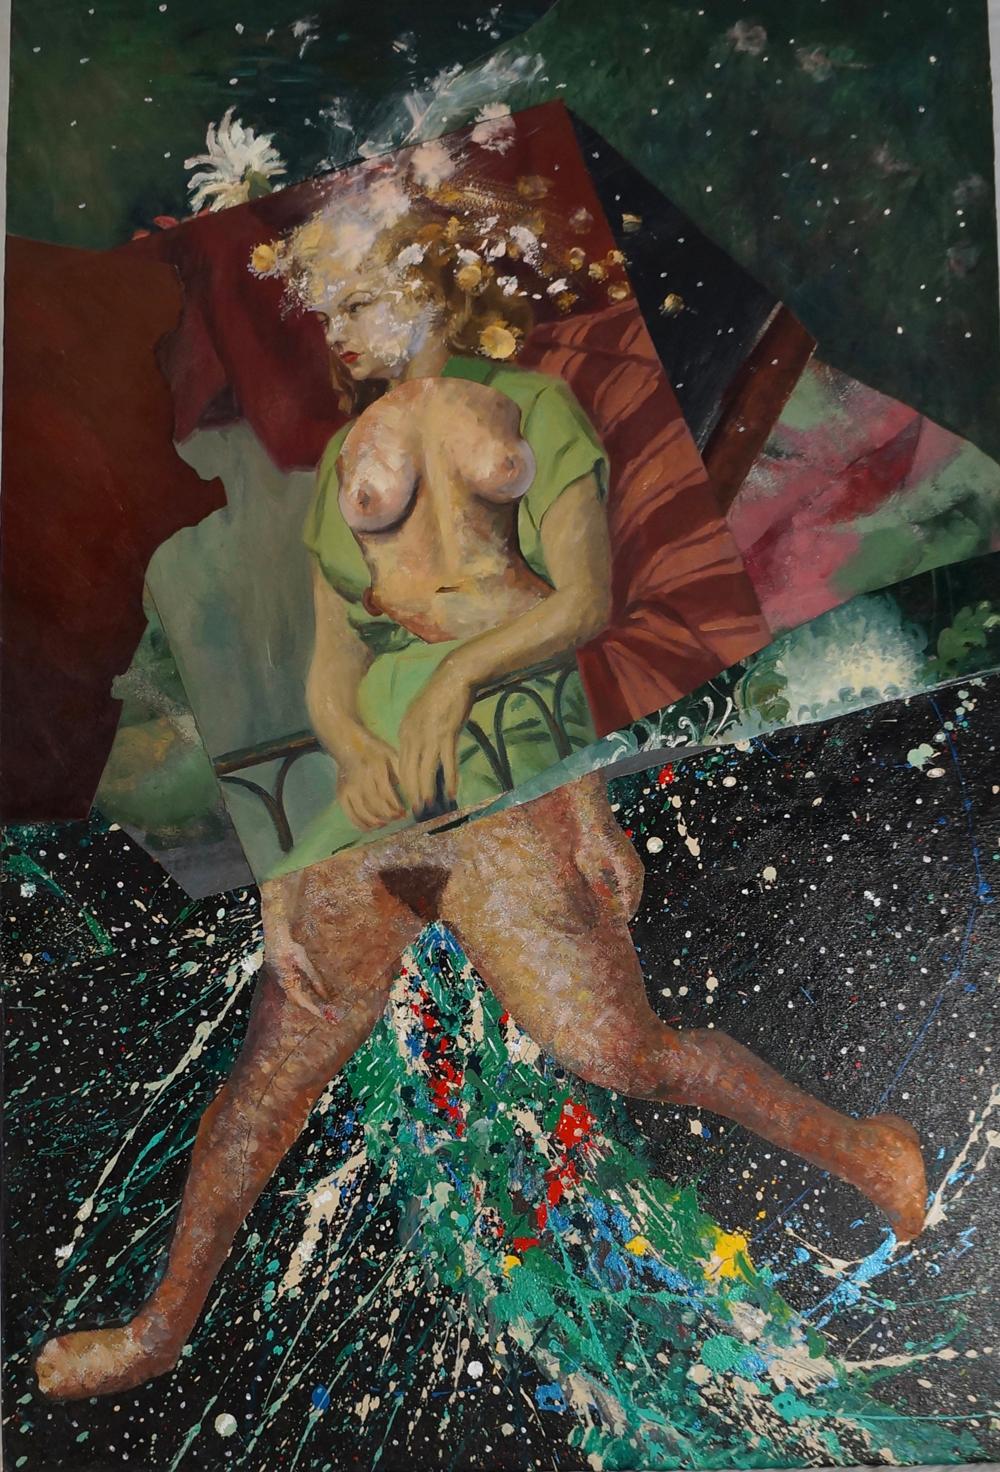 "Birth of a Galaxy", collage, portrait, maroon, green, acrylic painting - Painting by John Baker